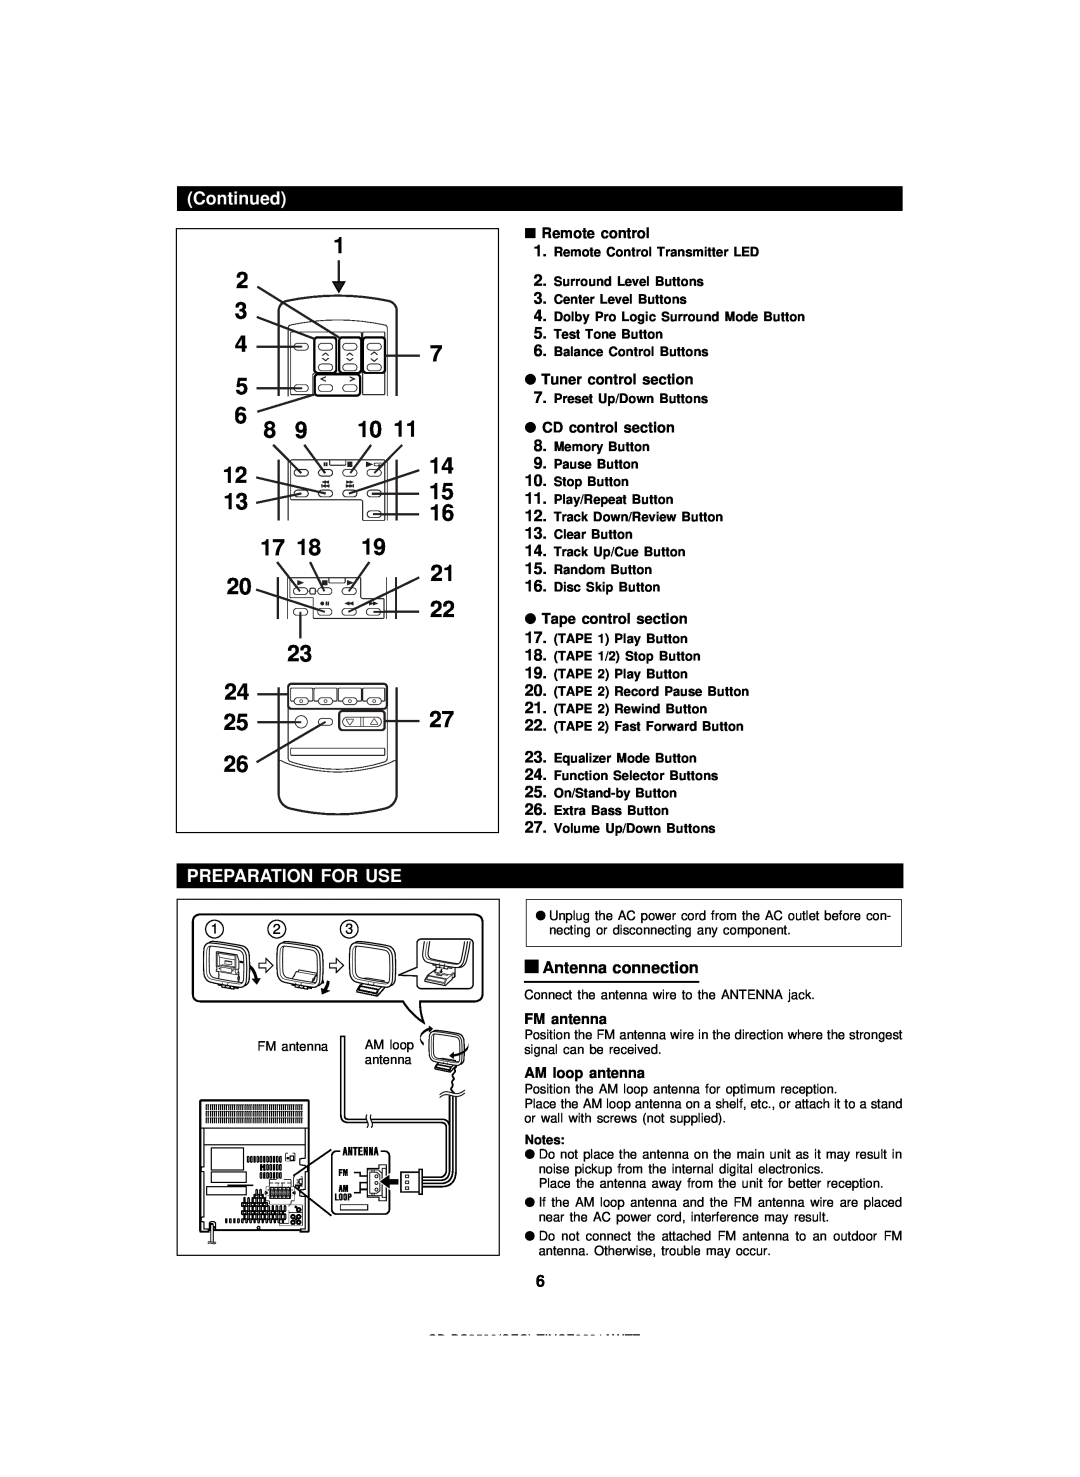 Sharp CD-PC3500 operation manual Preparation For Use, Continued, Antenna connection 